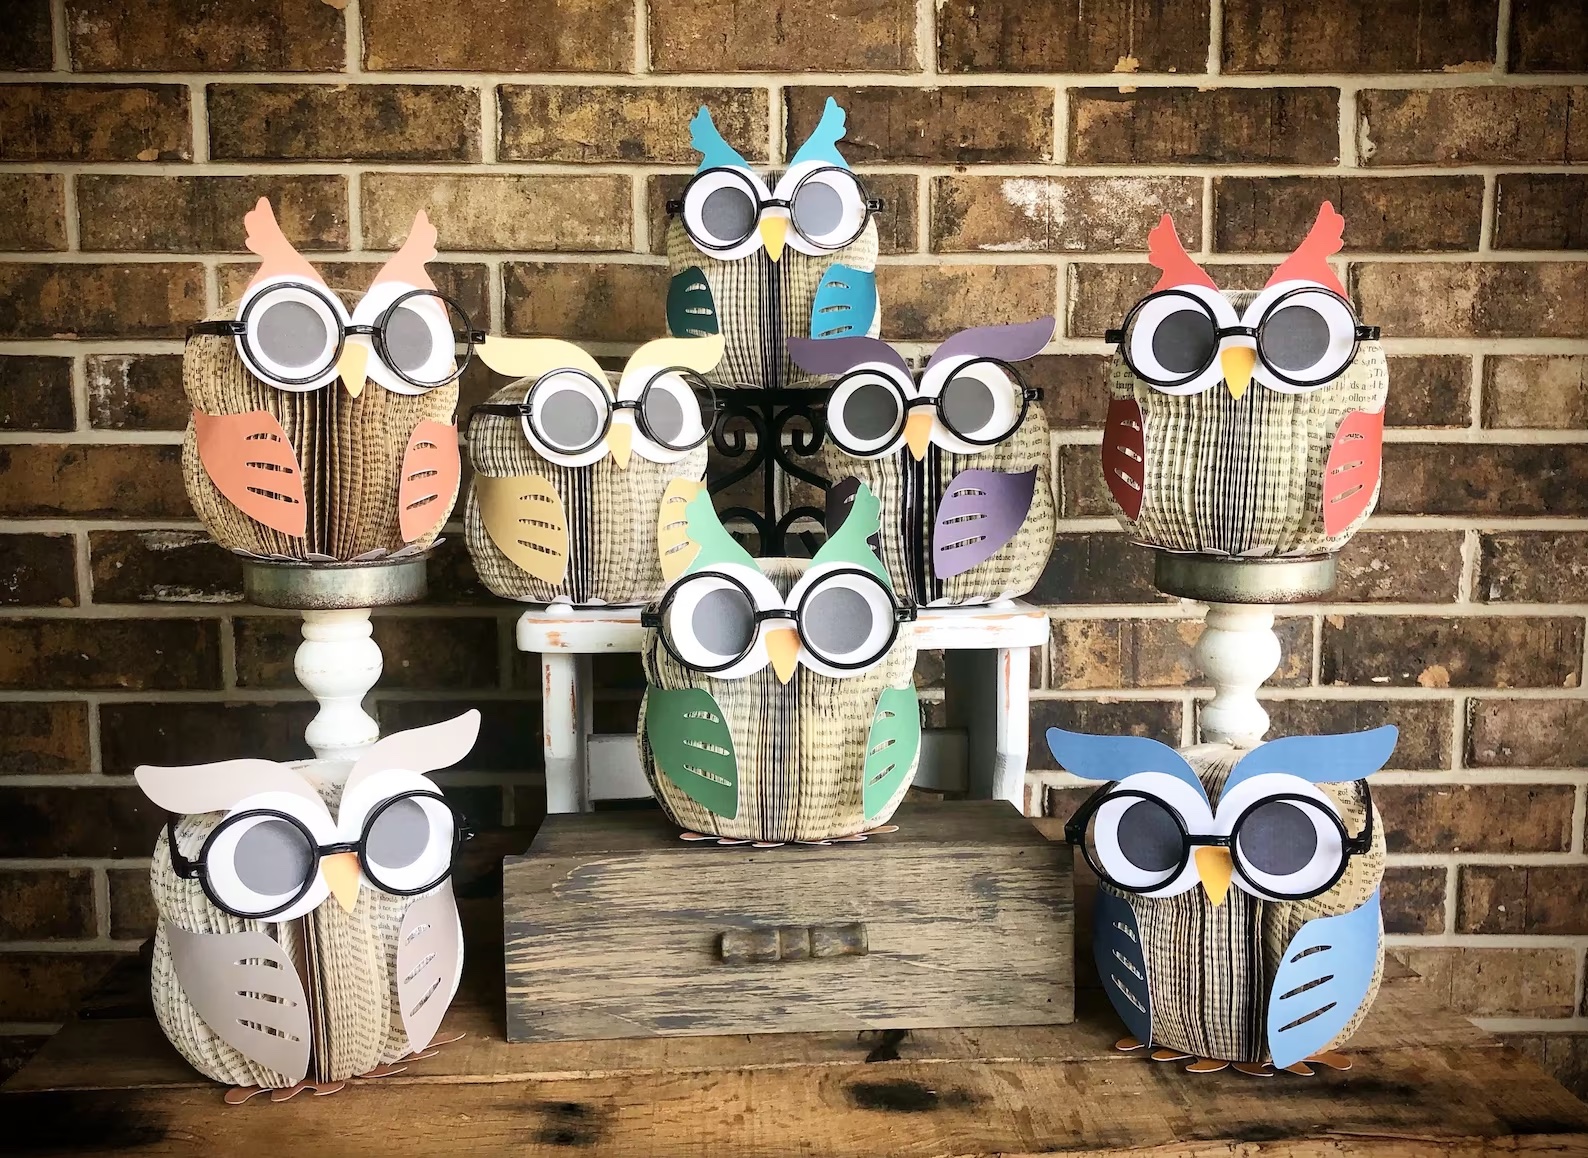 a photo of eight owl sculptures made out of paper